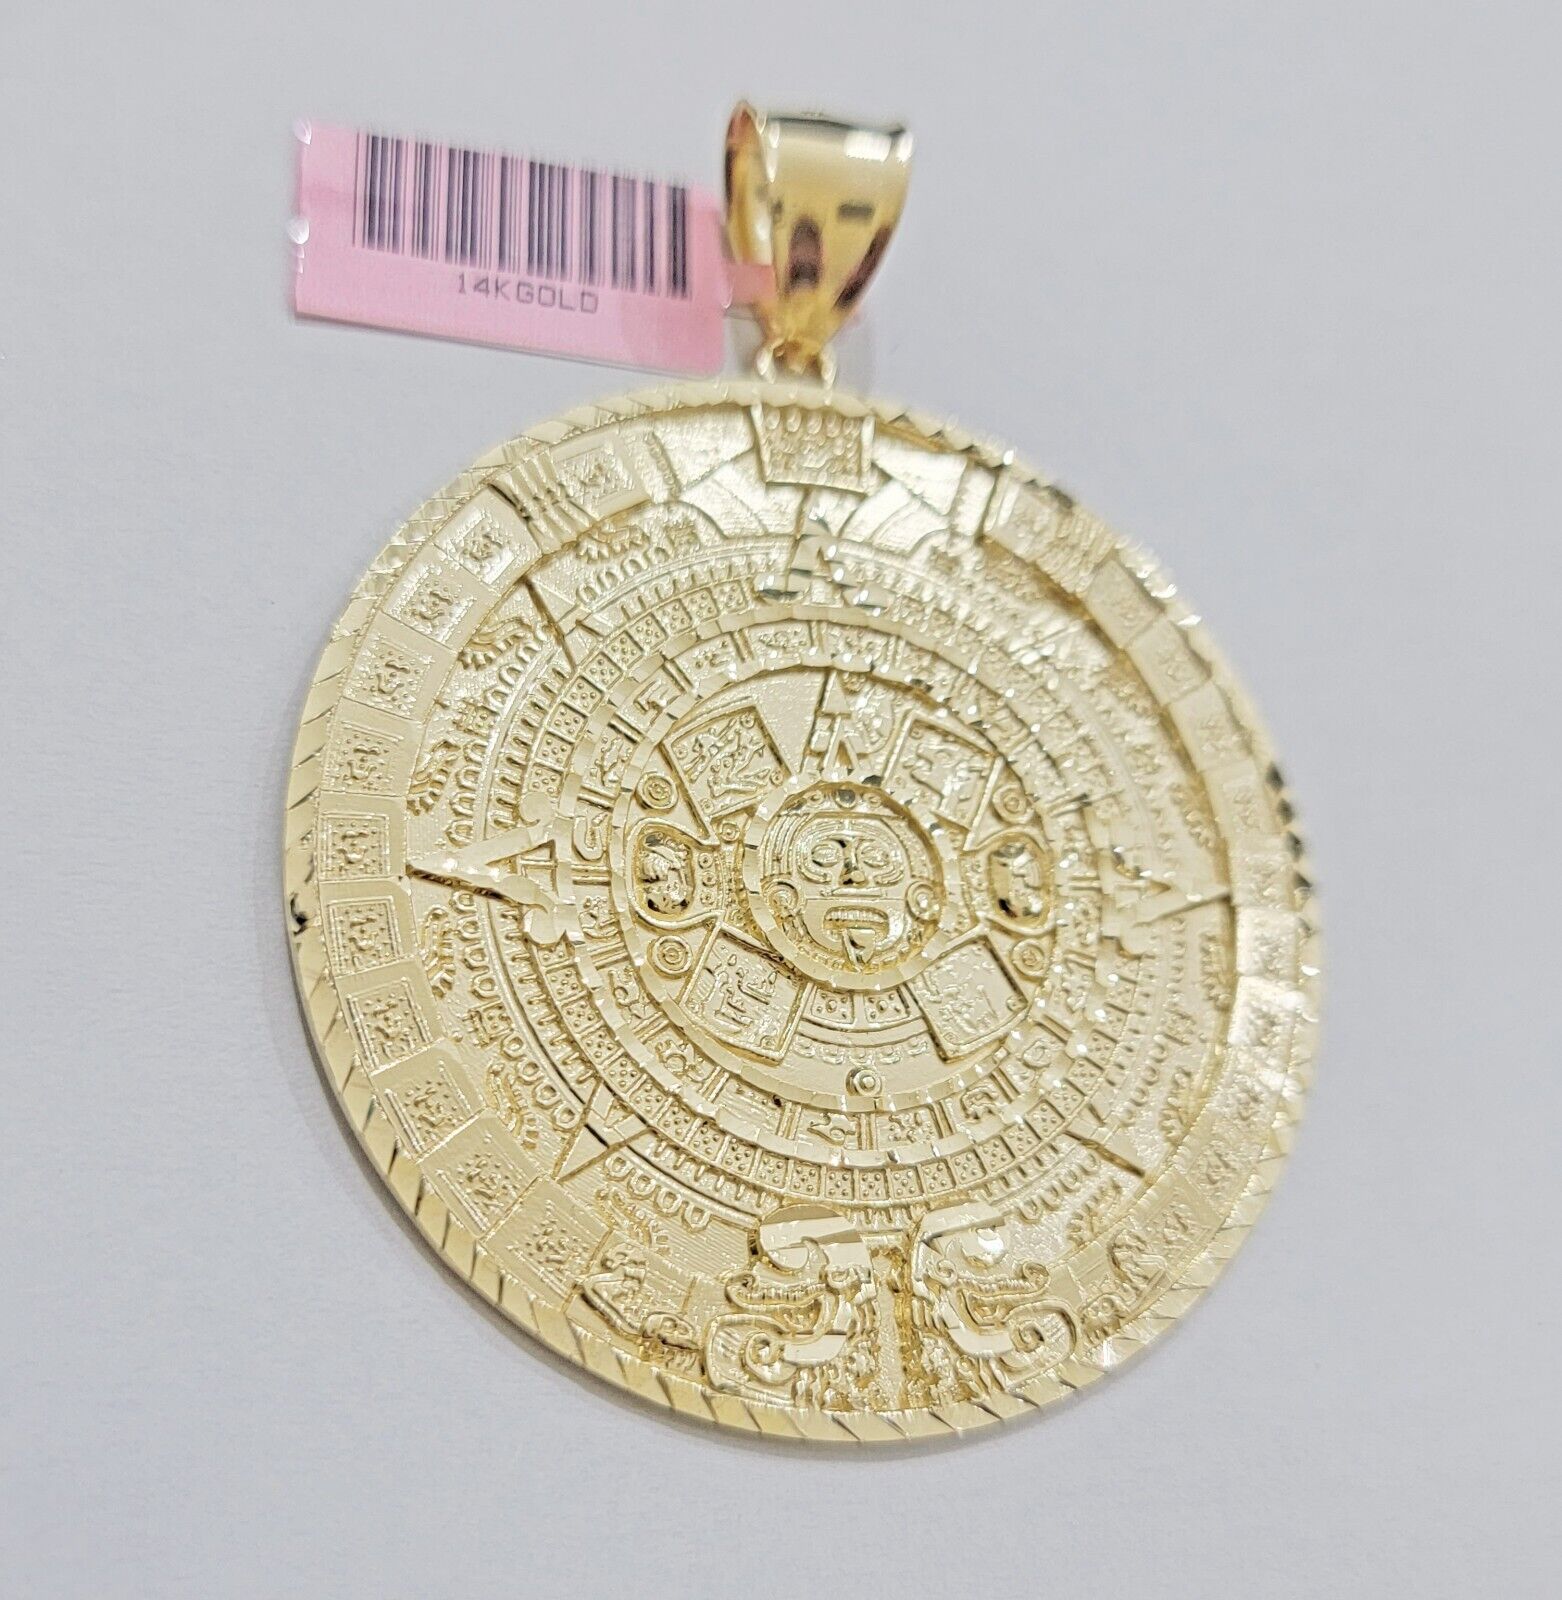 SOLID Real 14kt Yellow Gold Pendant Aztec Mayan Calendar 2.5" Men's Round Charm